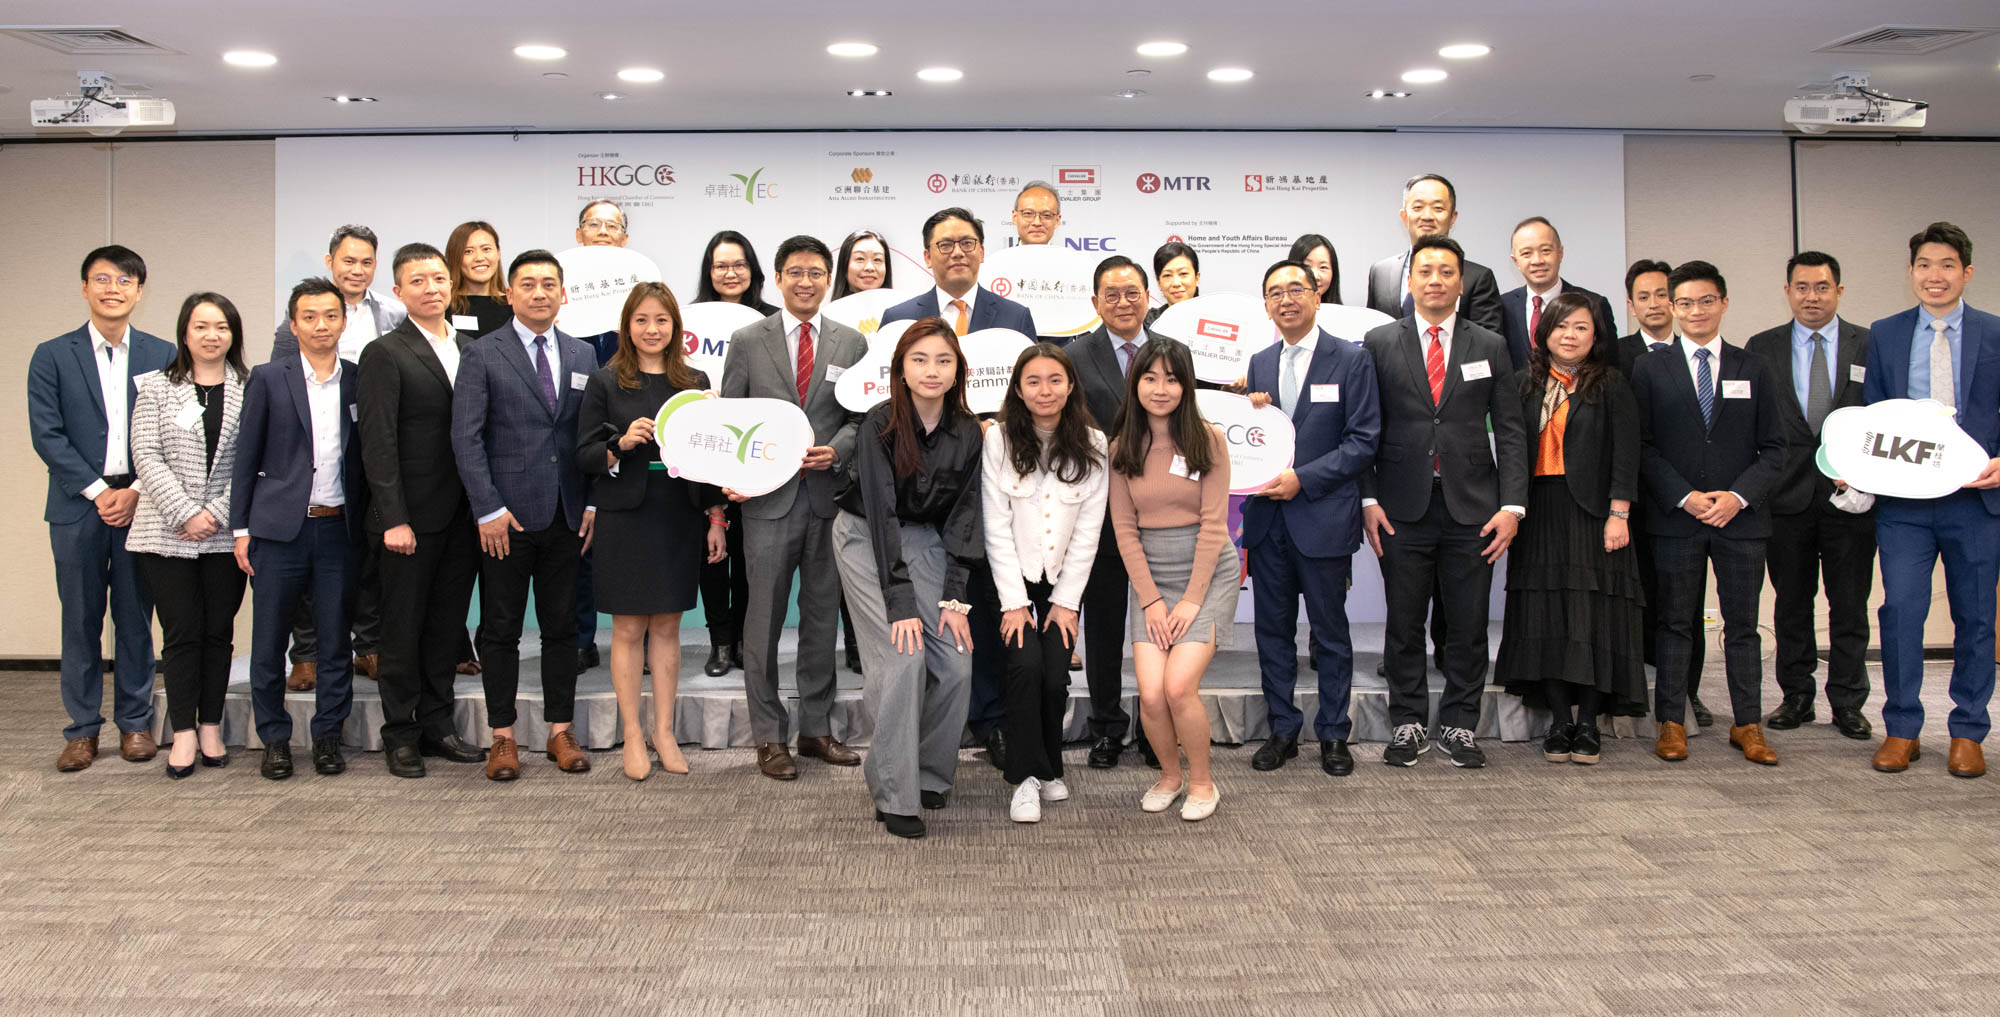 Clarence Leung, Under Secretary for Home and Youth Affairs, programme organizers, sponsors, trainers, mentors, universities’ representatives, as well as some students who participated in last year’s programme, kick off the 2023 round of the HKGCC Pitch Perfect Programme.